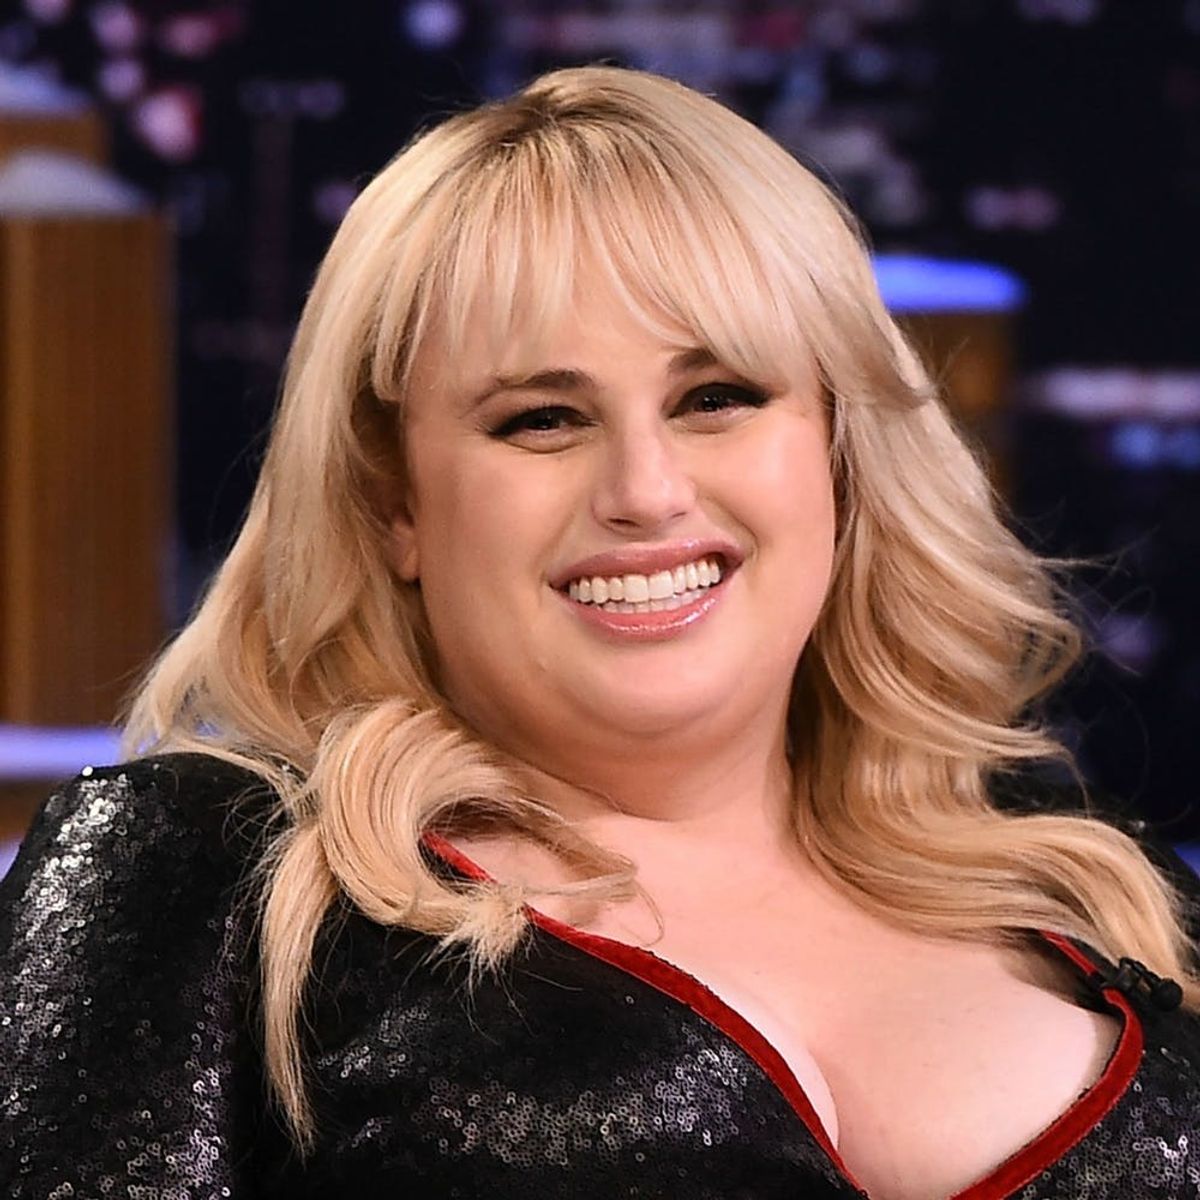 Rebel Wilson’s Plus-Size Actress Gaffe Is a Lesson for the Rest of Us